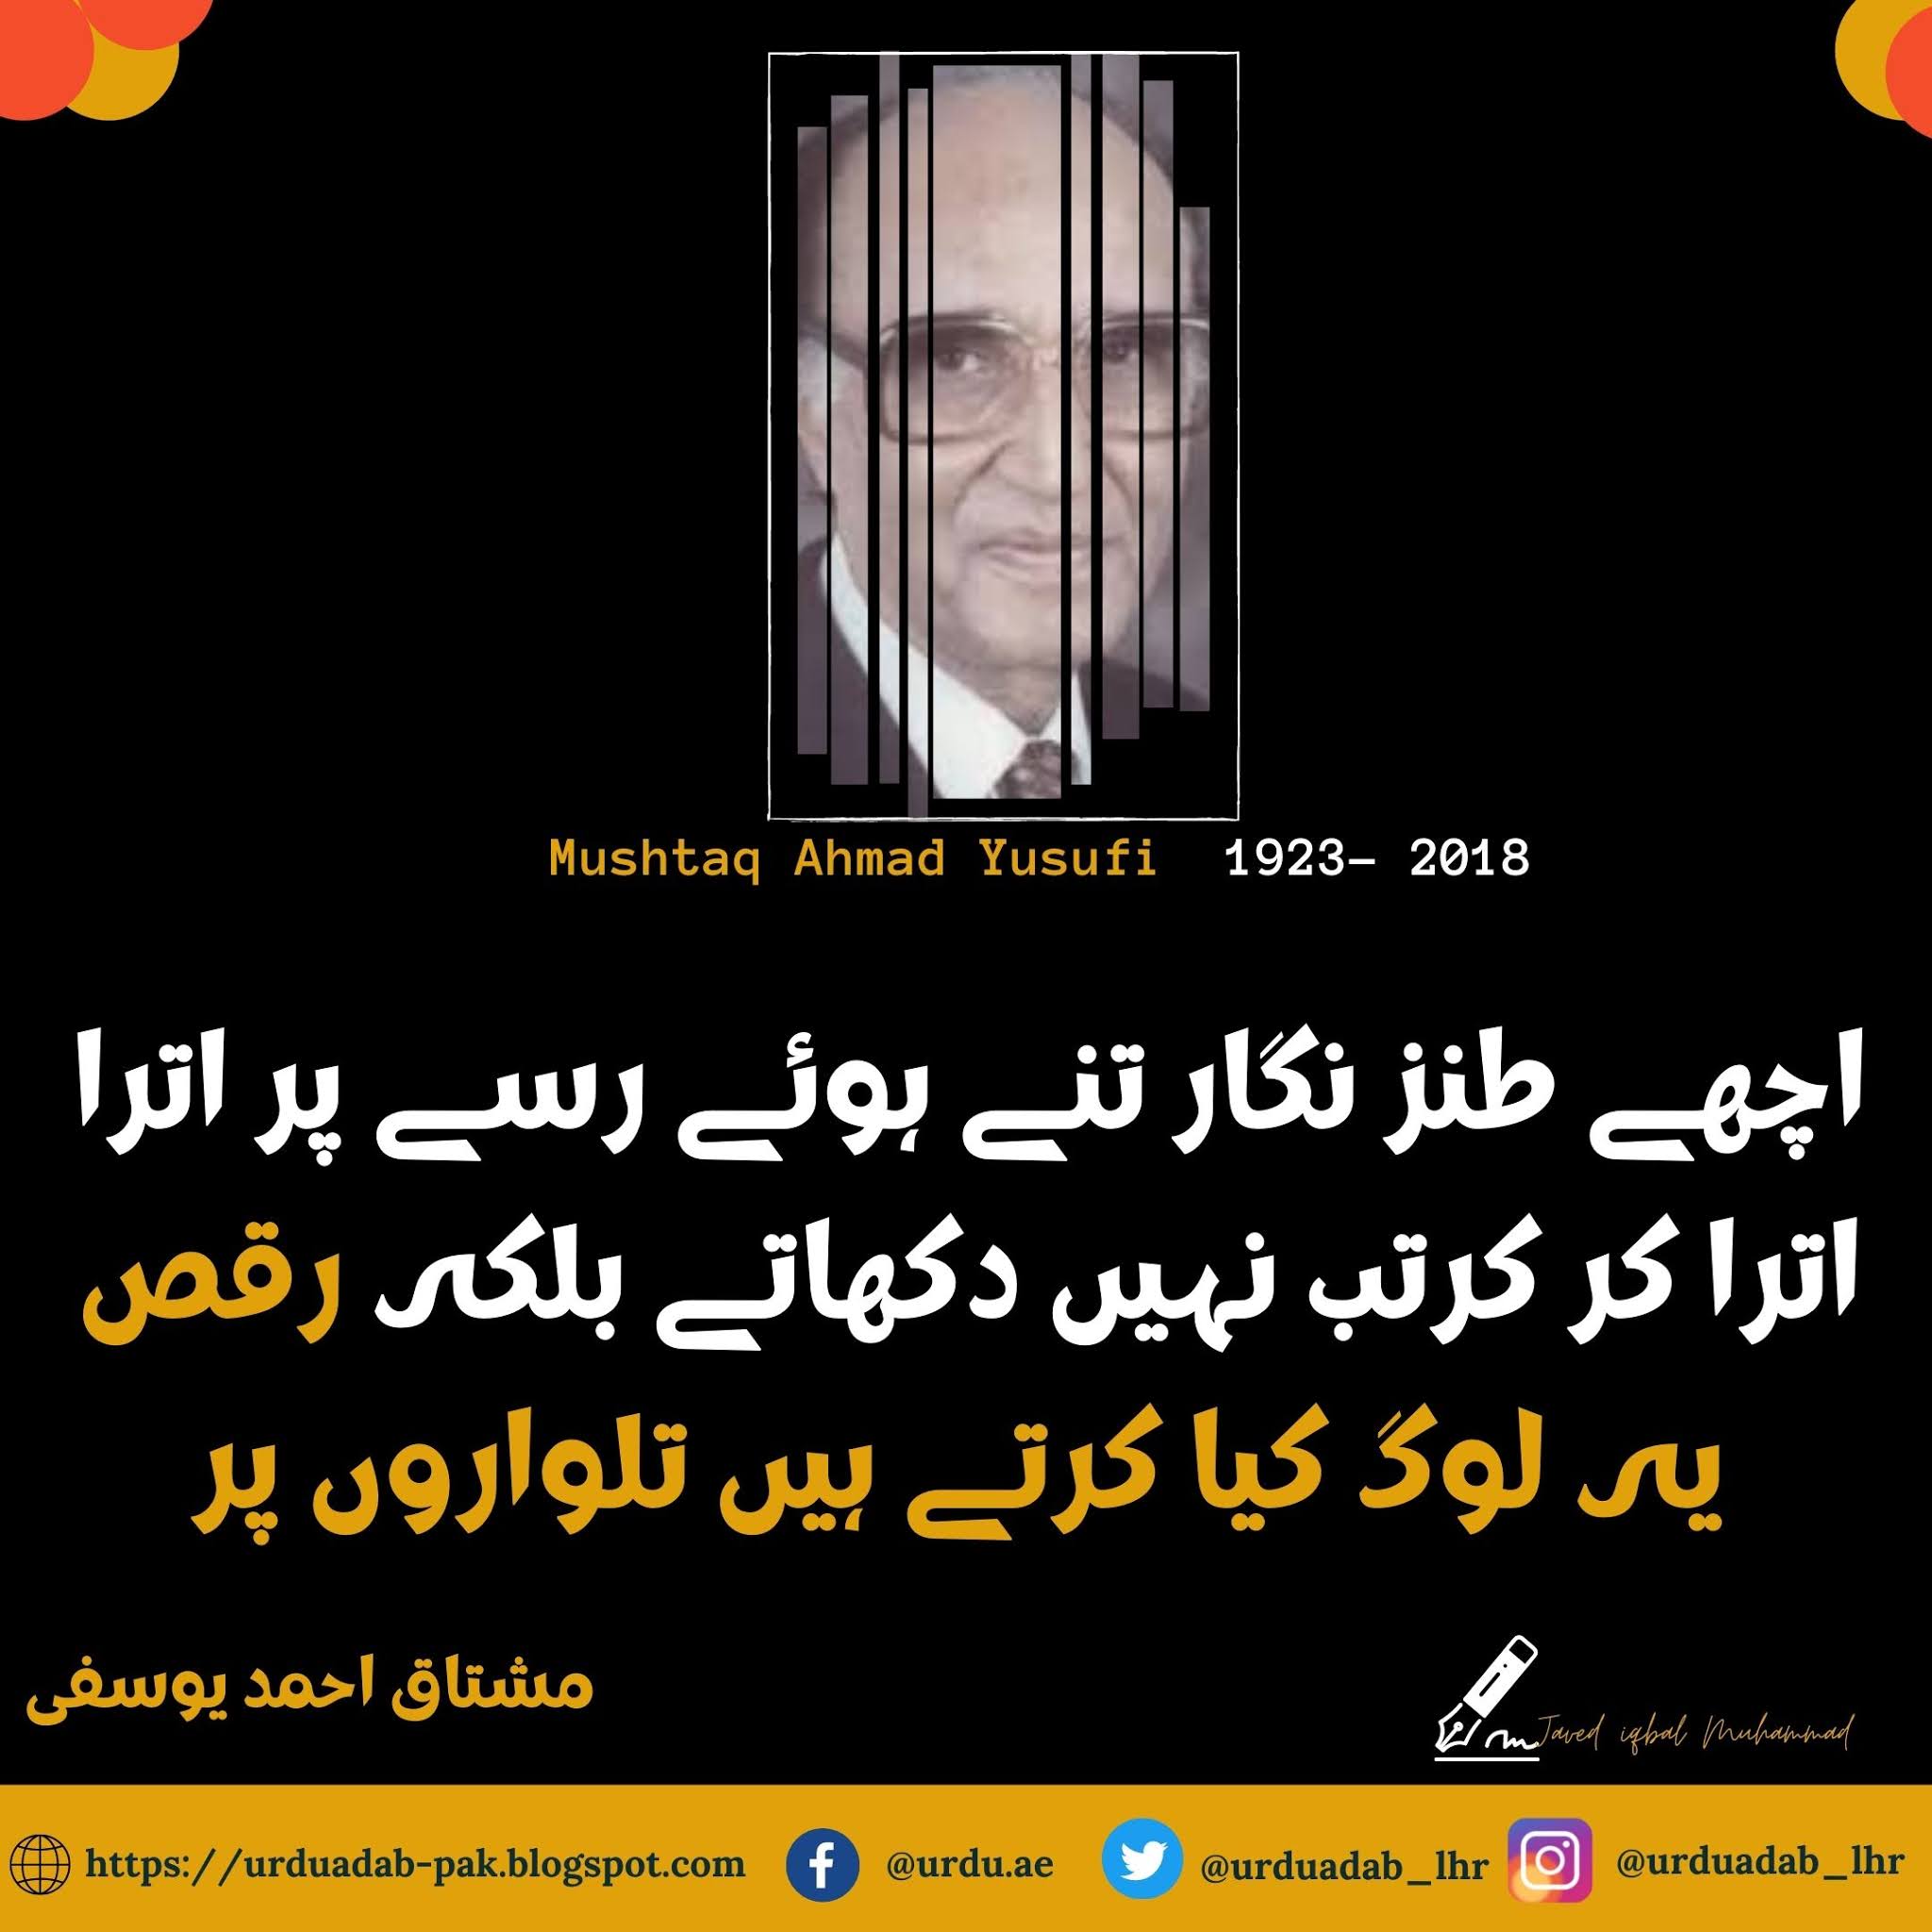 25-Best-Quotes-of-Mushtaq-Ahmed-Yousufi-Quotes-Mushtaq-Ahmad-Yusufi-Funny Quotes-Mushtaq-Ahmad- Yusufi-Tanz-o-Mazah-mushtaq-ahmad-yusufi-quotes-in hindi-Mushtaq-Ahmed-Yousufi-Quotes